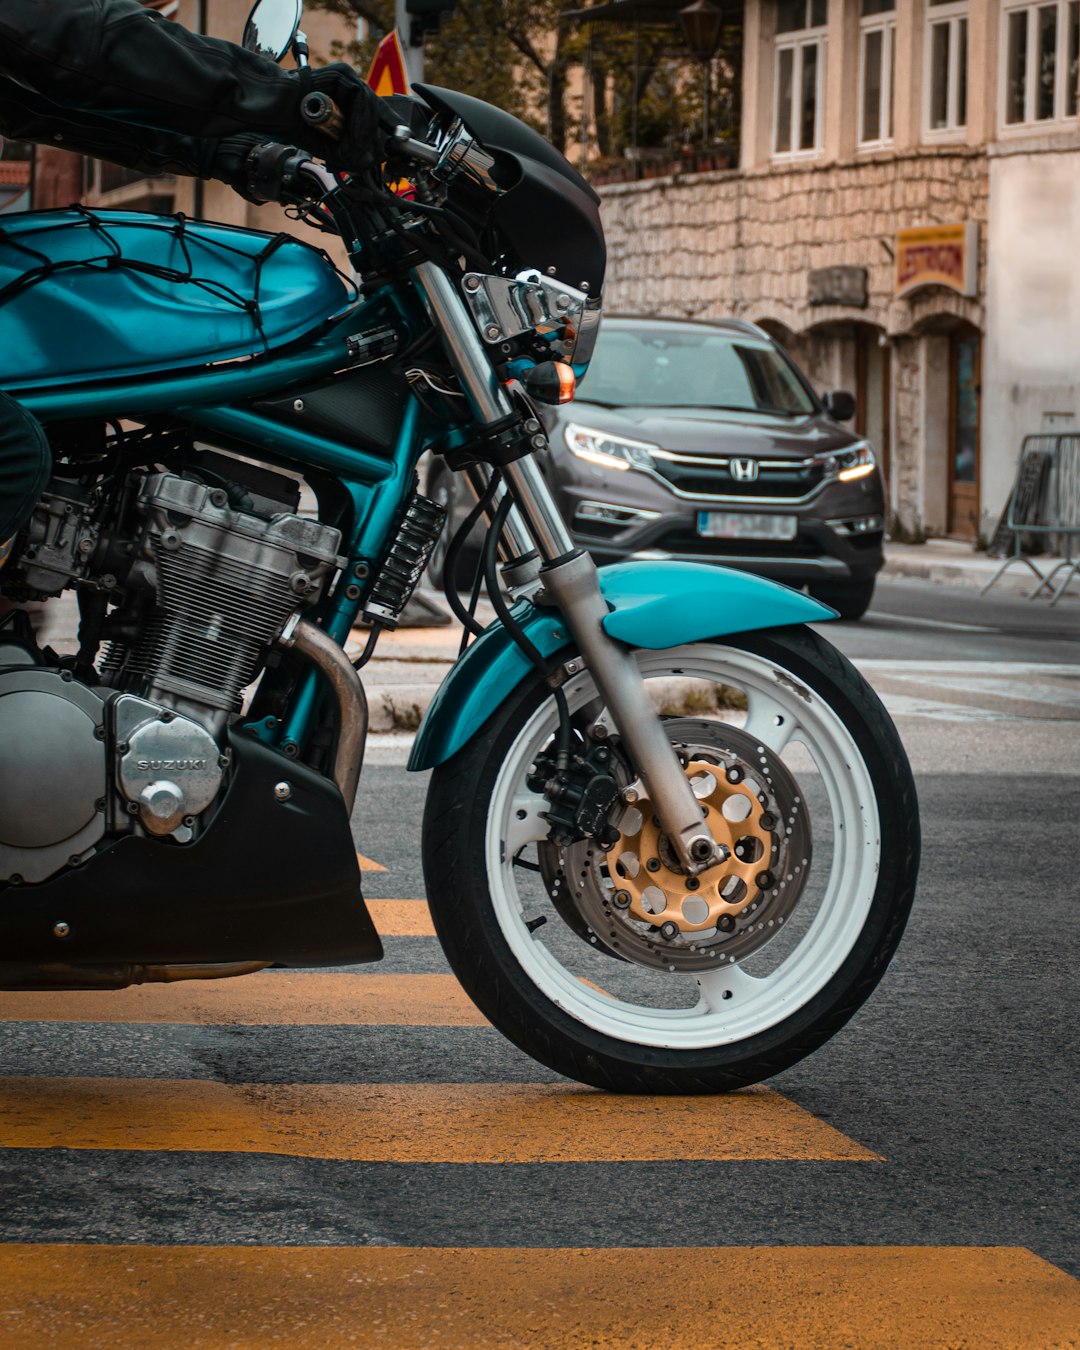 black and blue motorcycle on road during daytime